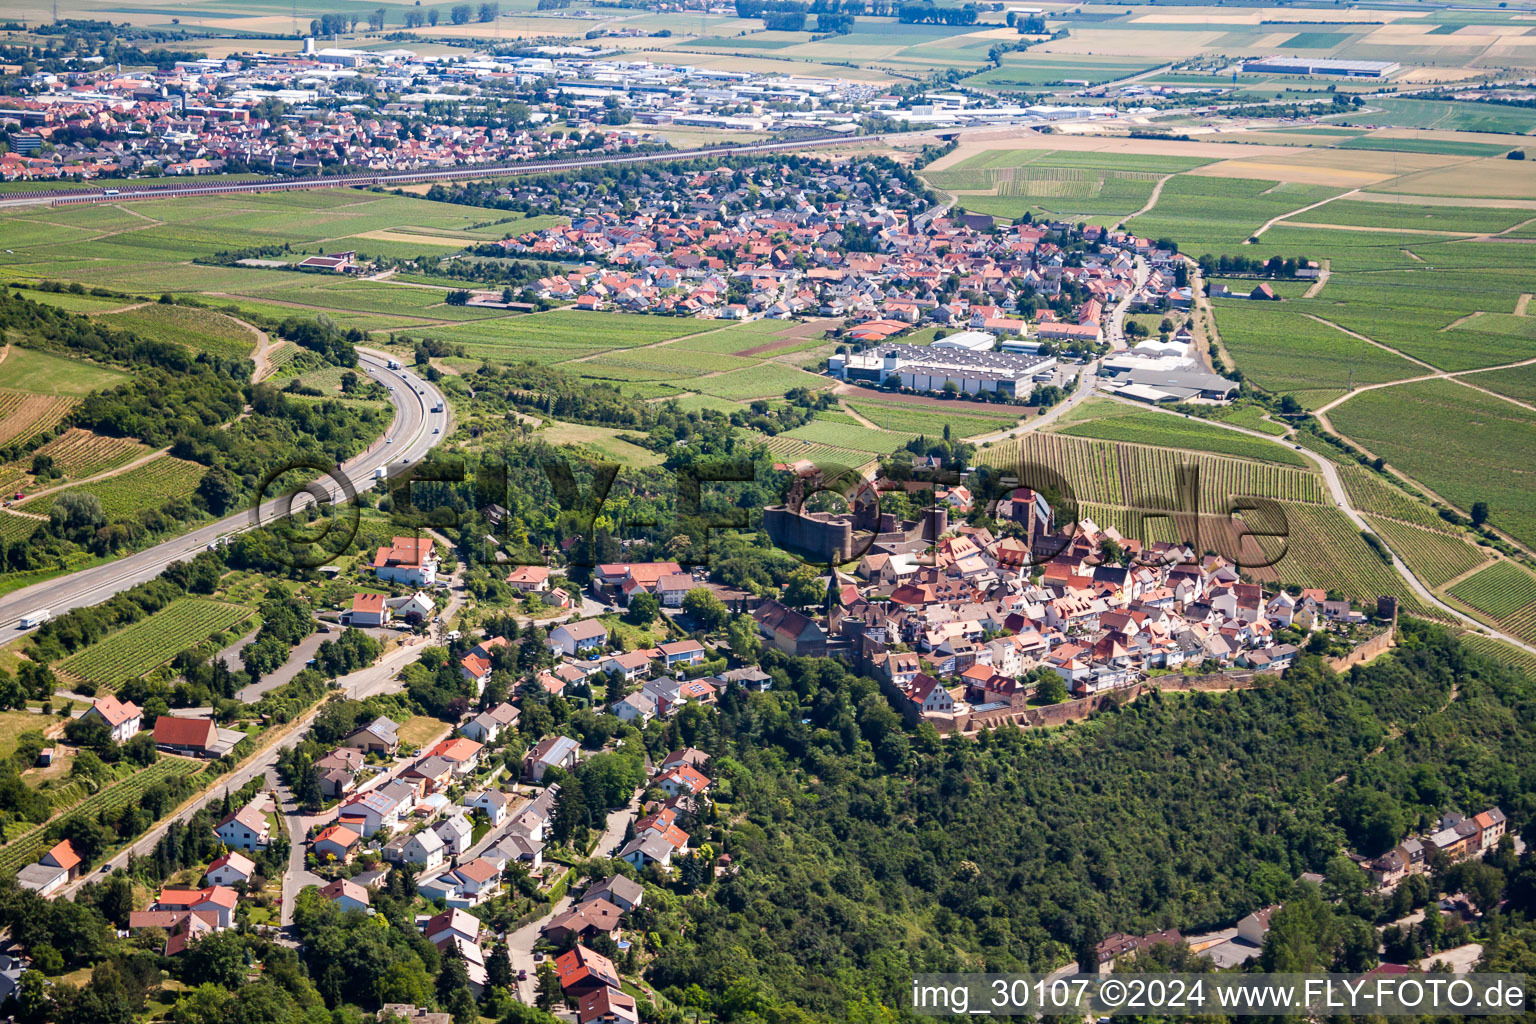 Neuleiningen in the state Rhineland-Palatinate, Germany seen from above